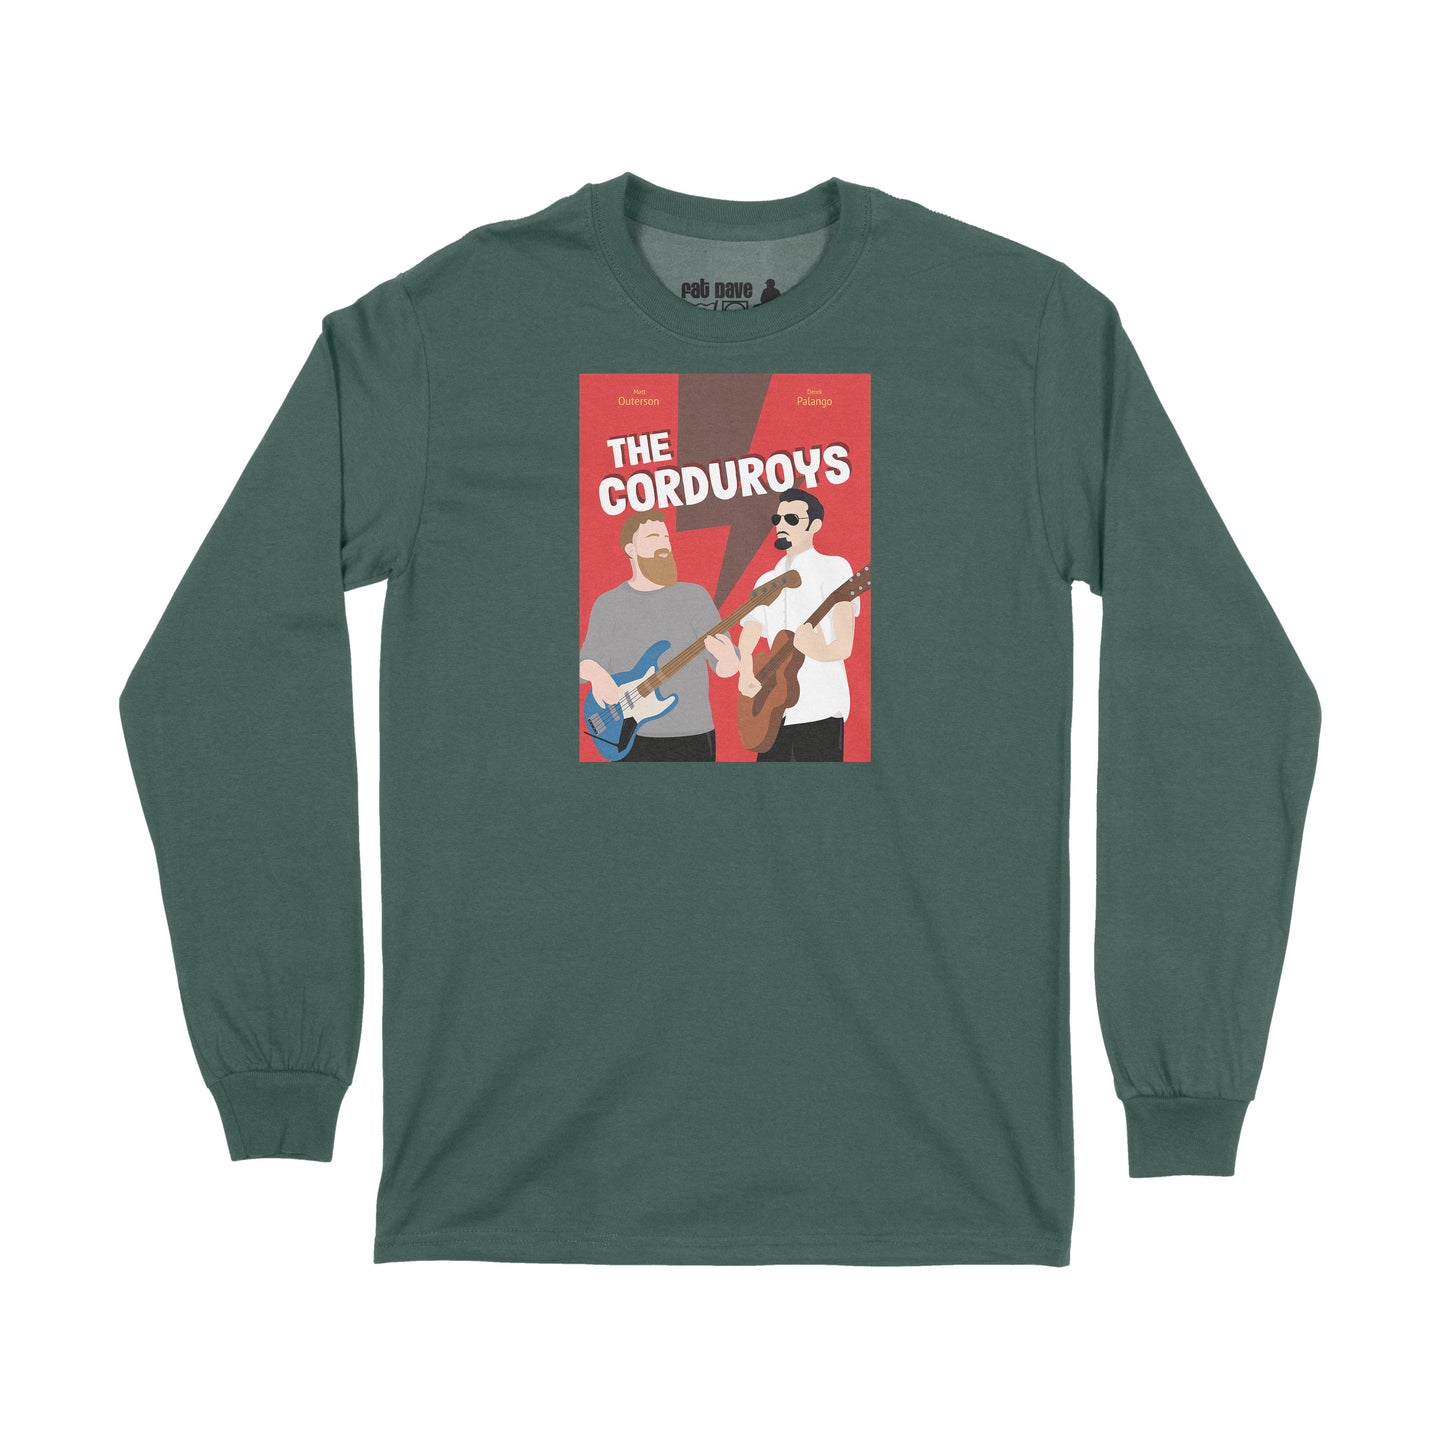 Brantford, Fat Dave, Long Sleeve T-Shirt, Musician, Poster, The Corduroys, Forest Green